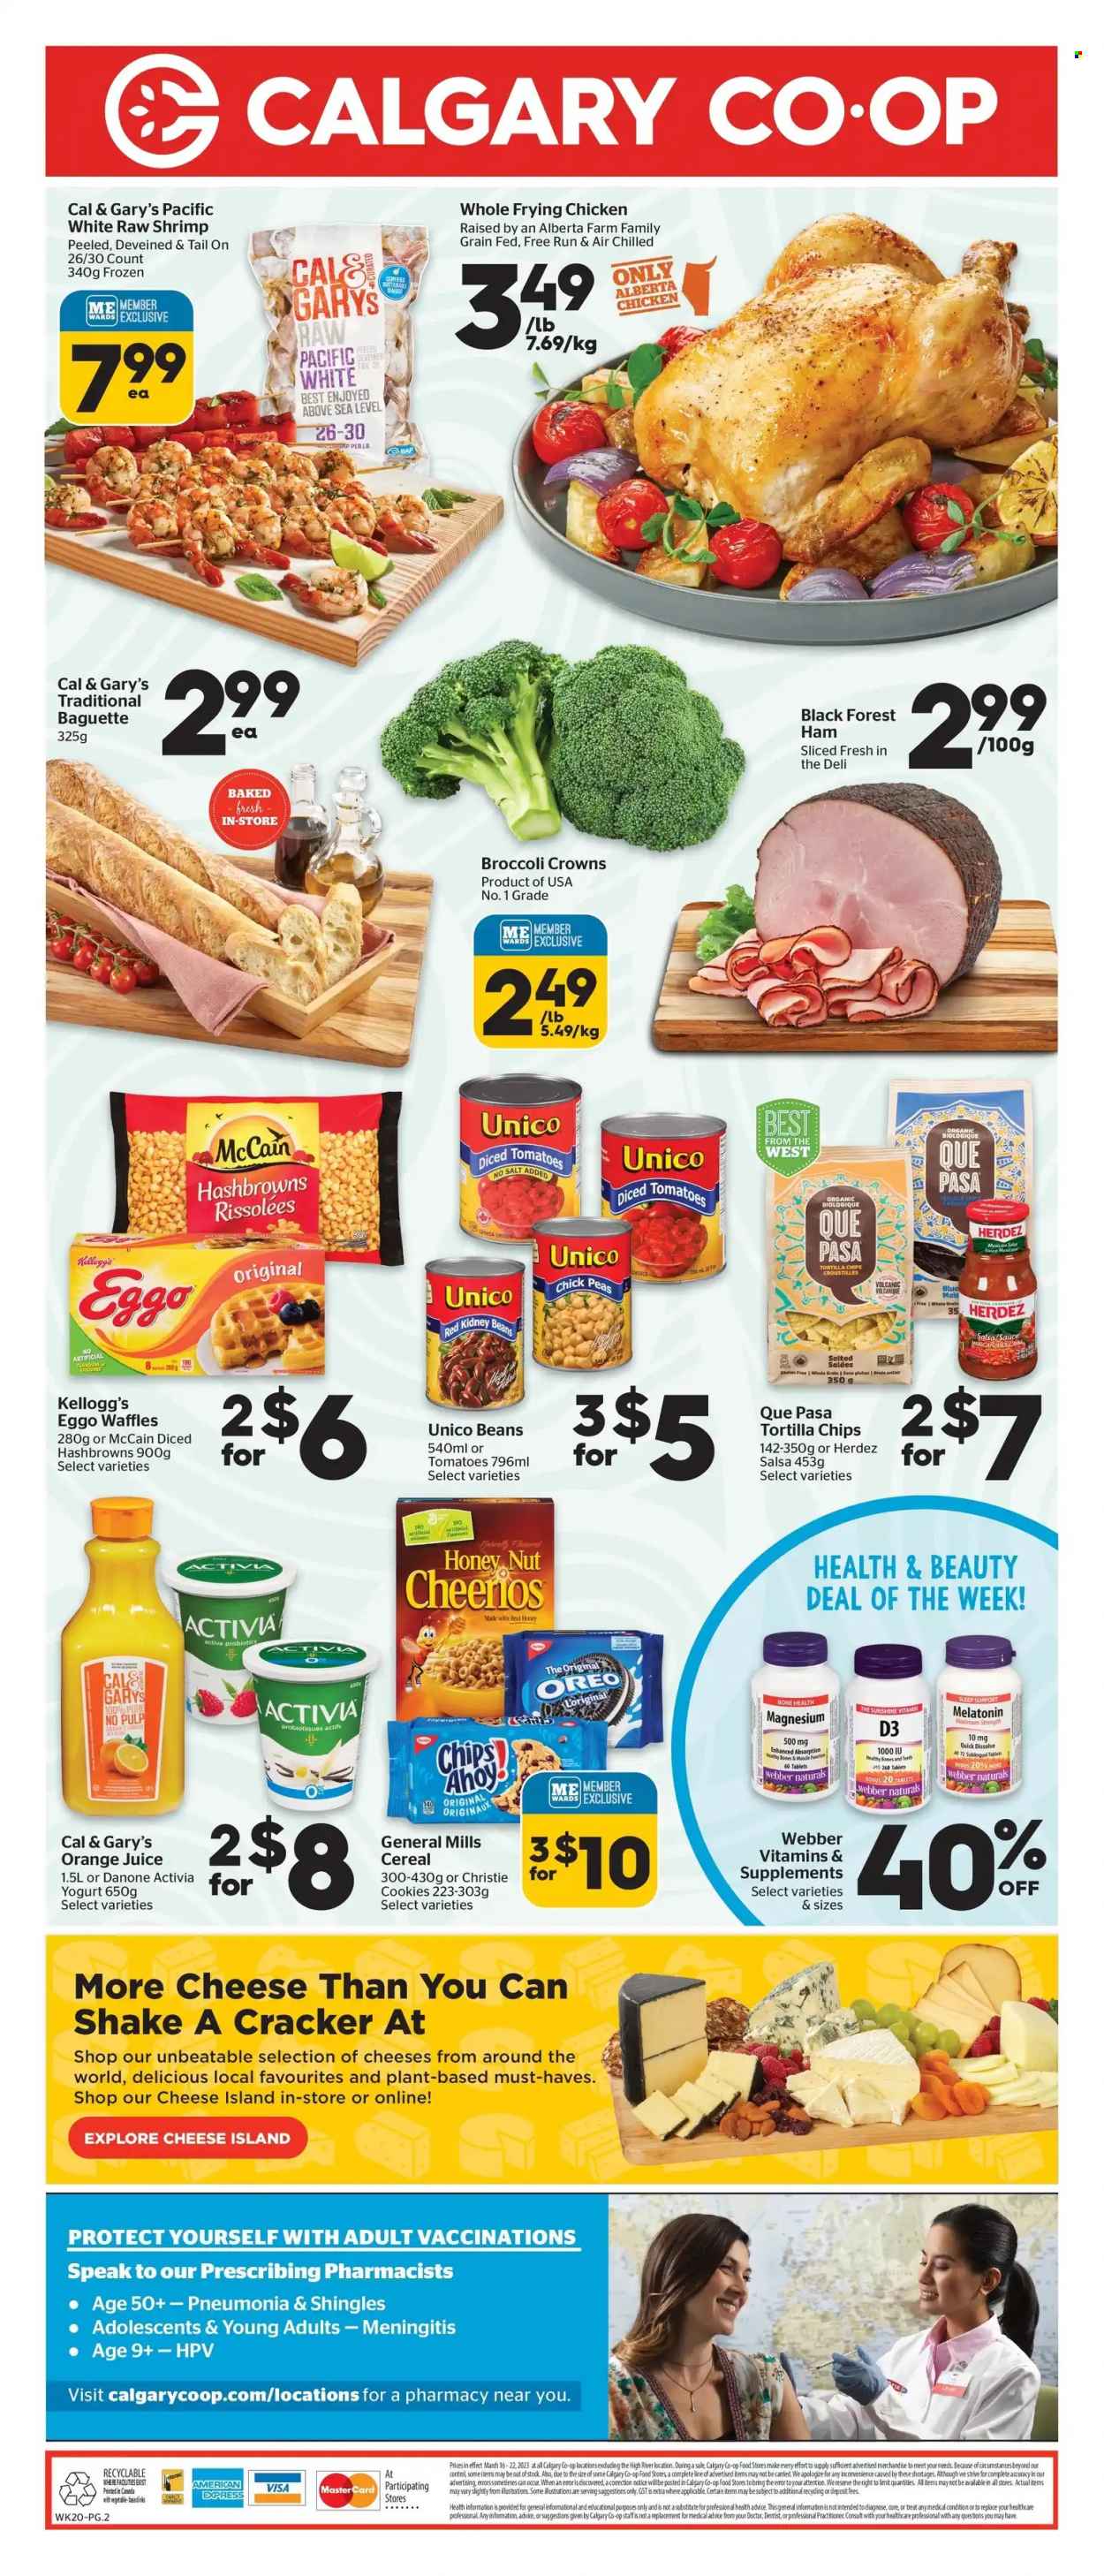 thumbnail - Calgary Co-op Flyer - March 16, 2023 - March 22, 2023 - Sales products - waffles, beans, peas, shrimps, sauce, ham, cheese, yoghurt, Activia, shake, Sunshine, McCain, hash browns, cookies, crackers, Kellogg's, tortilla chips, kidney beans, diced tomatoes, cereals, Cheerios, salsa, orange juice, juice, magnesium, probiotics, vitamin D3, baguette, Oreo, Danone. Page 2.